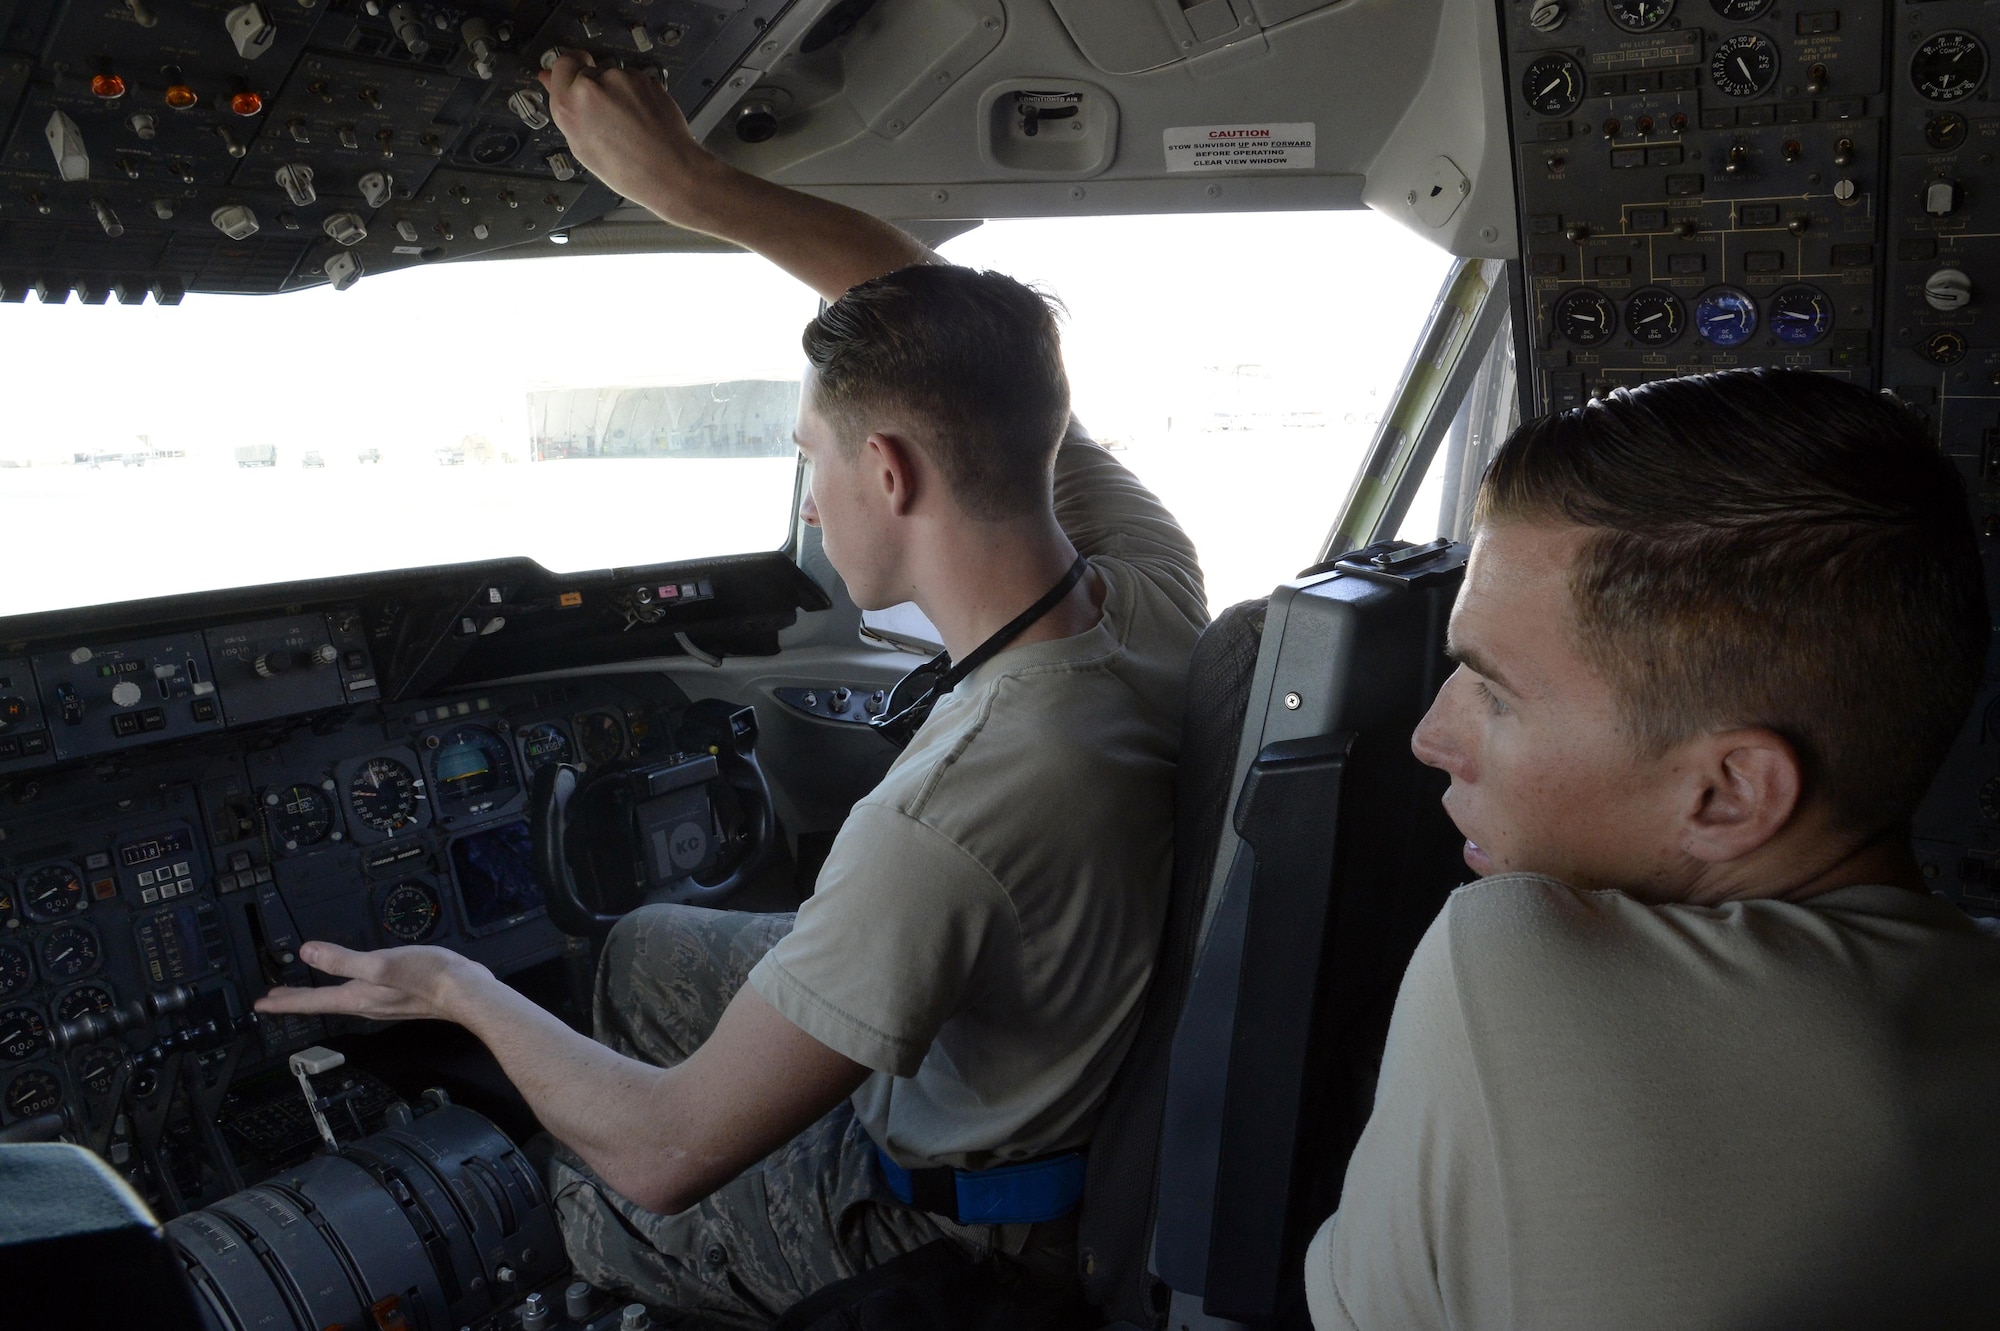 Airman 1st Class Taylor, right, KC-10 Extender crew chief, watches as Senior Airman Will, KC-10 Extender instrument and flight control systems technician, preforms an operational check on a KC-10 Extender at an undisclosed location in Southwest Asia Feb. 2, 2015.  Instrument and flight control system technicians are responsible for maintaining all aspects of flight controls, including autopilot systems and flight deck instrumentation. Taylor is currently deployed from Travis Air Force Base, Calif., and is a native of Belleview, S.D. Will is deployed from Travis AFB, Calif., and is a native of Glendale, Ariz. (U.S. Air Force photo/Tech. Sgt. Marie Brown)